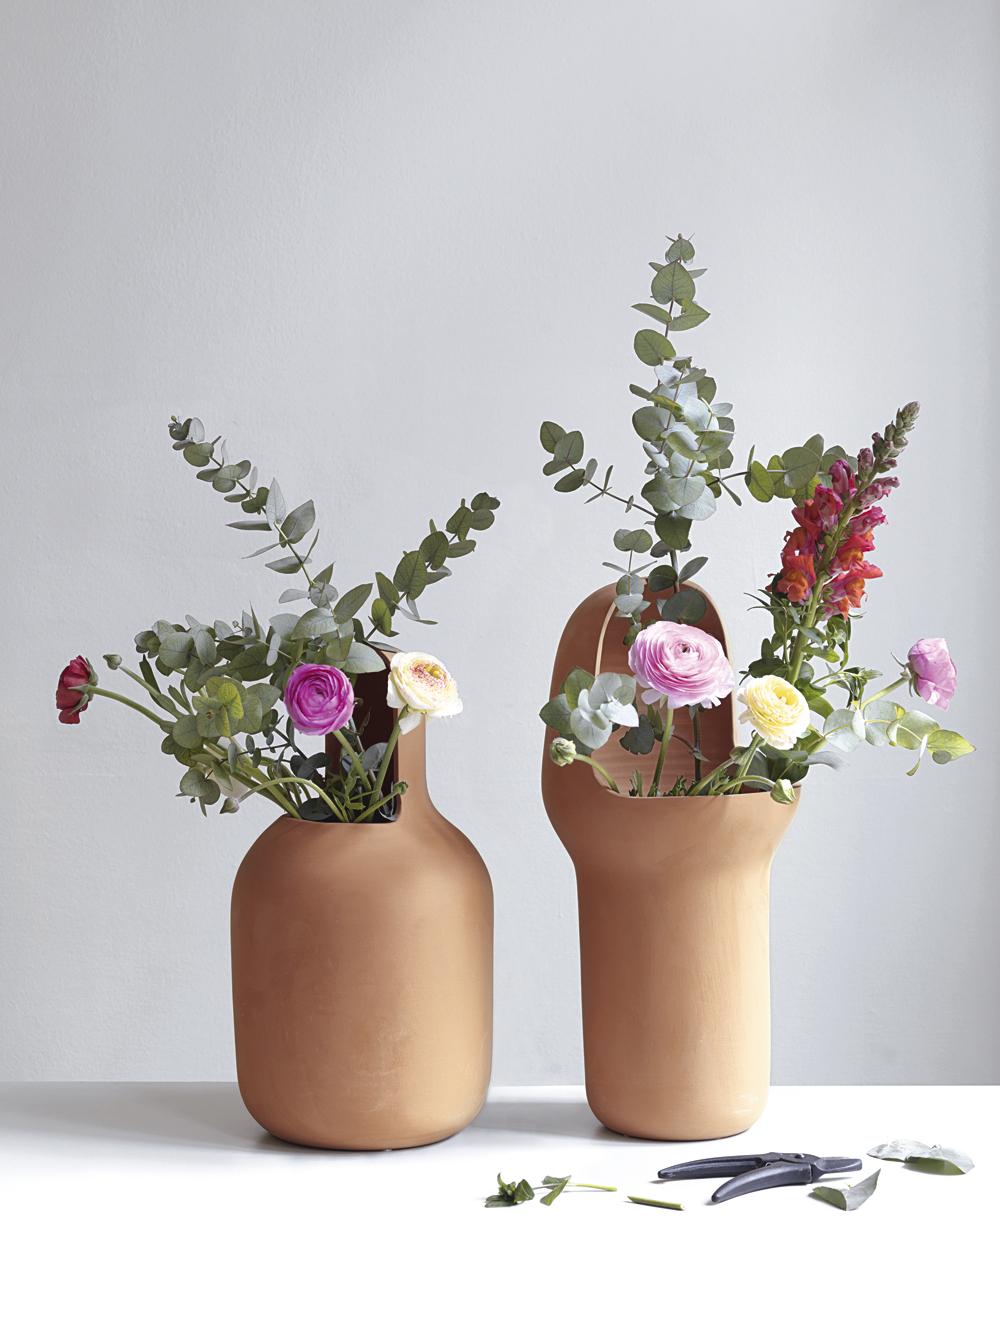 Jaime Hayon designed the Gardenia Vases in terracotta as a complement to his outdoor furniture collection. 

The three vases are unique in form, illustrating Hyaon's unmistakable hallmark design. Handcrafted in treated terracotta to withstand all